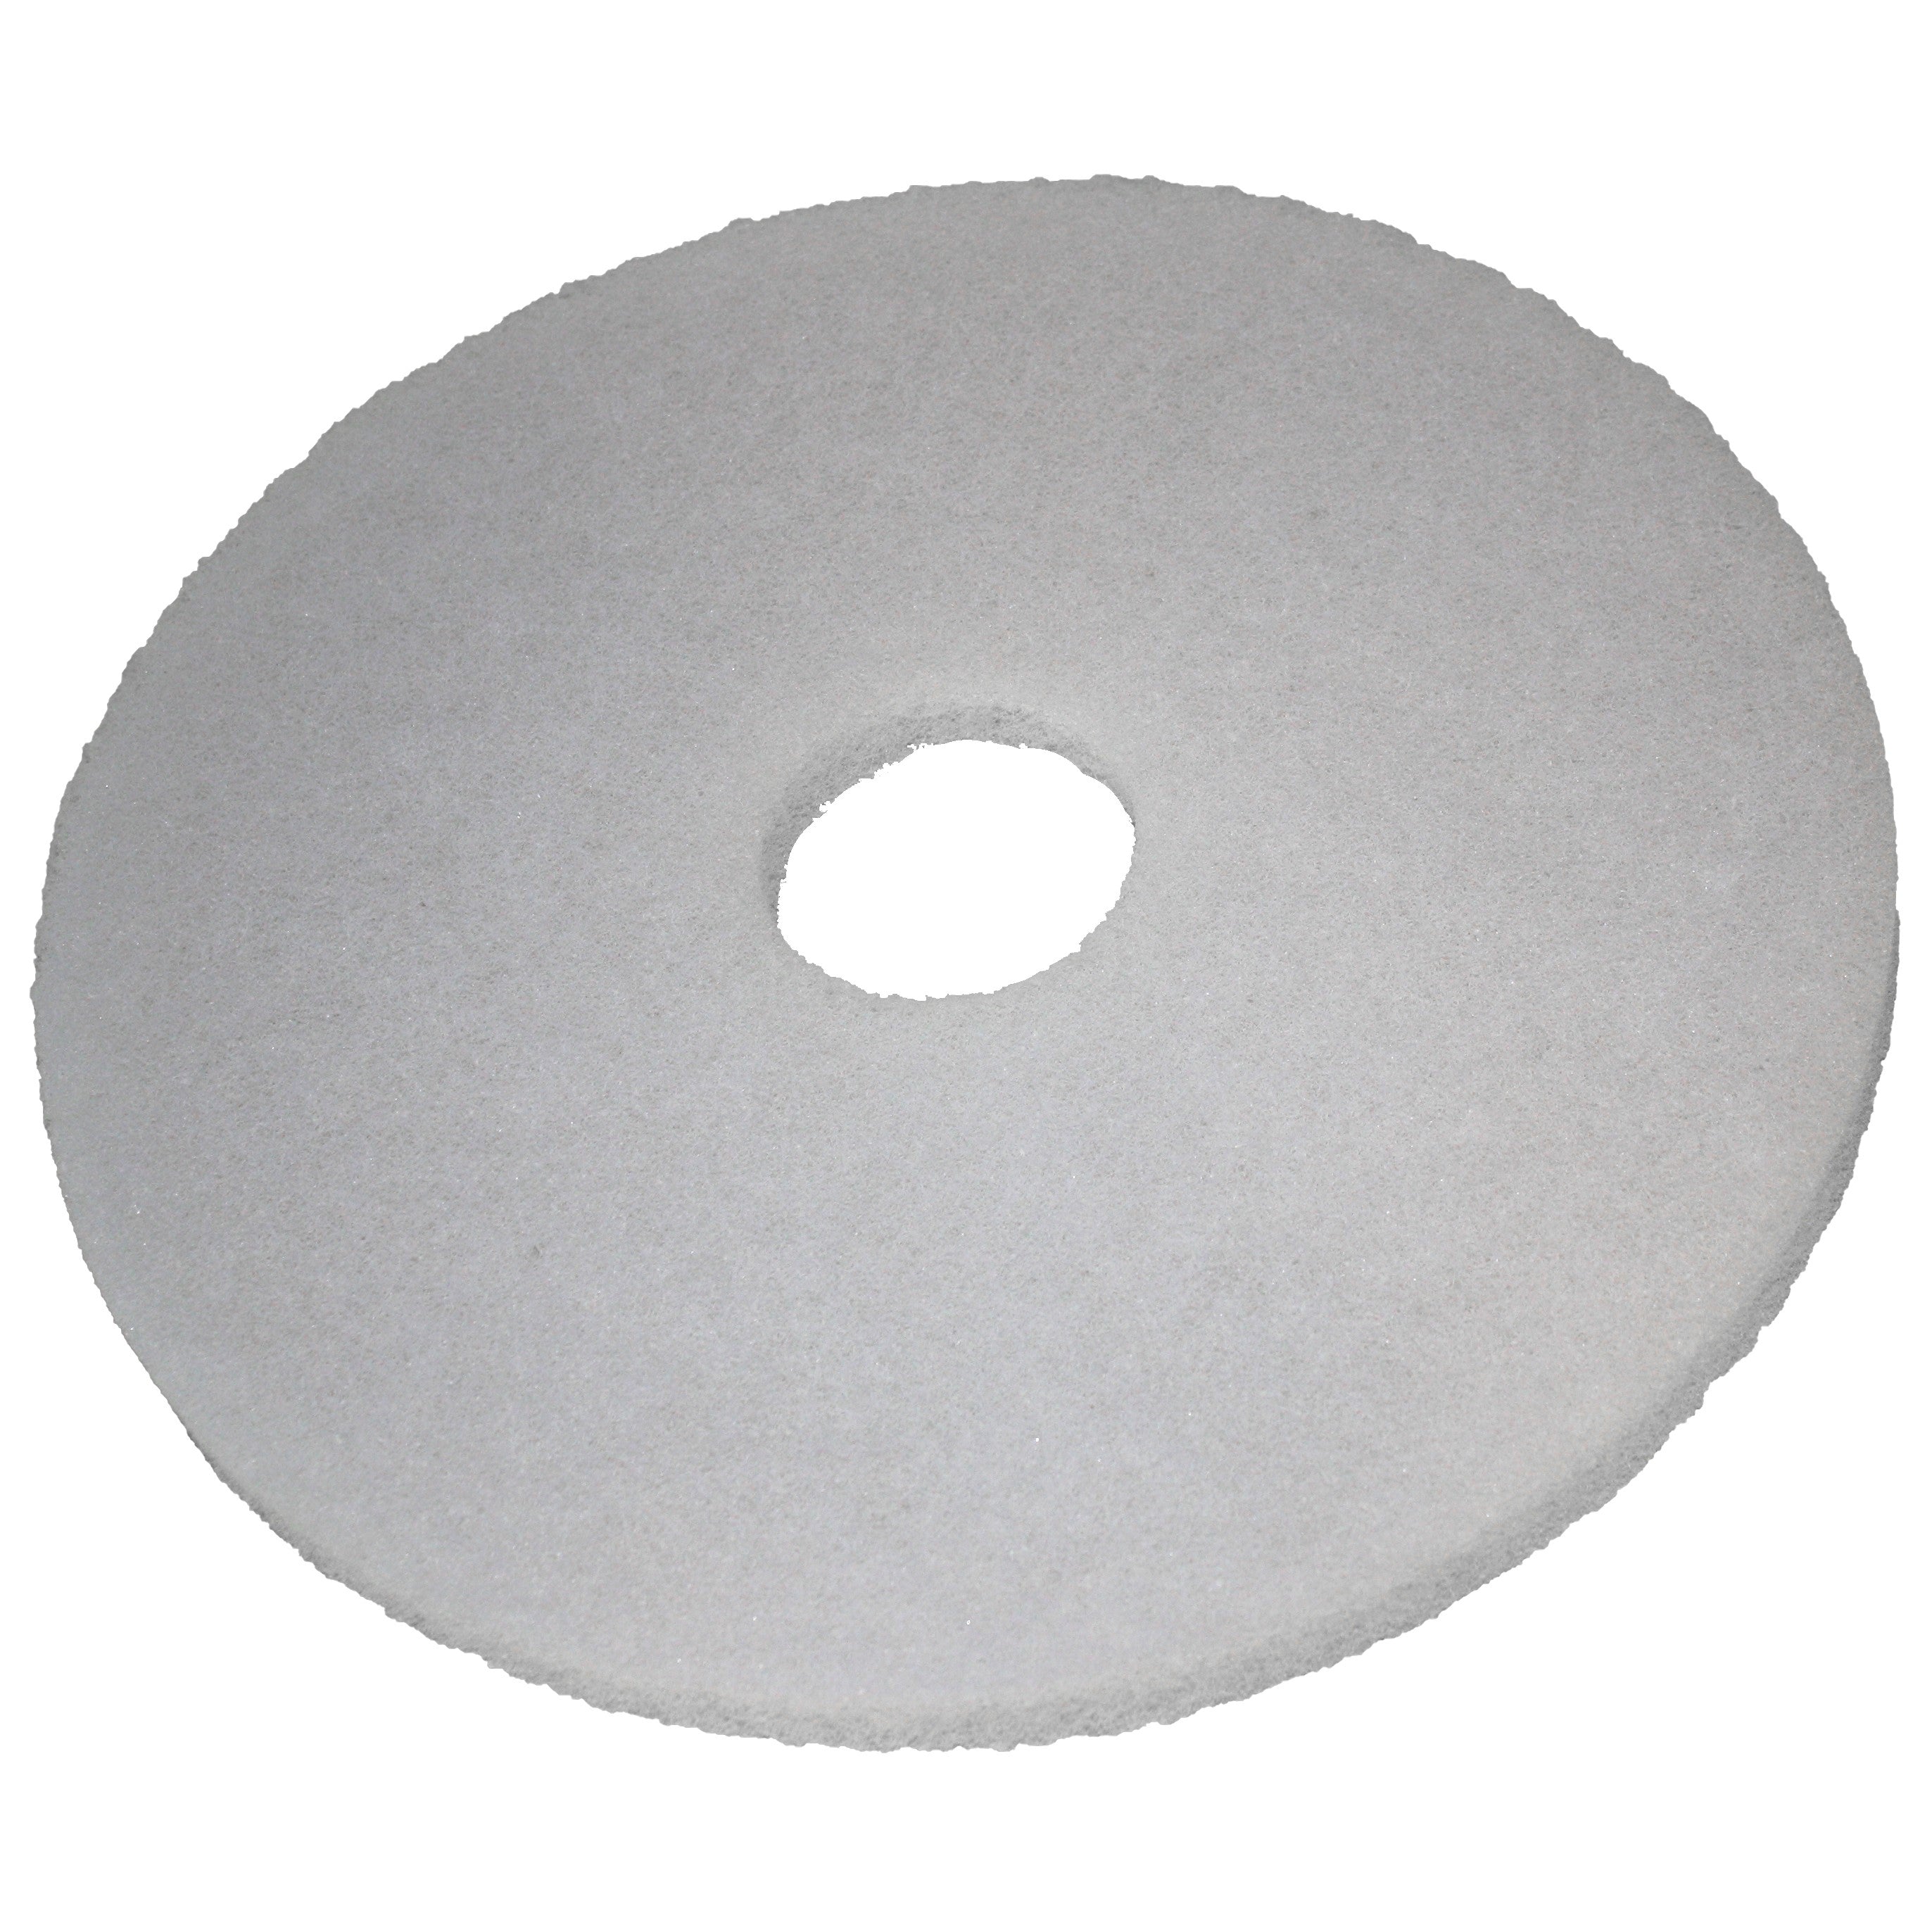 Pad weiss, Ø 203 mm, Polyester